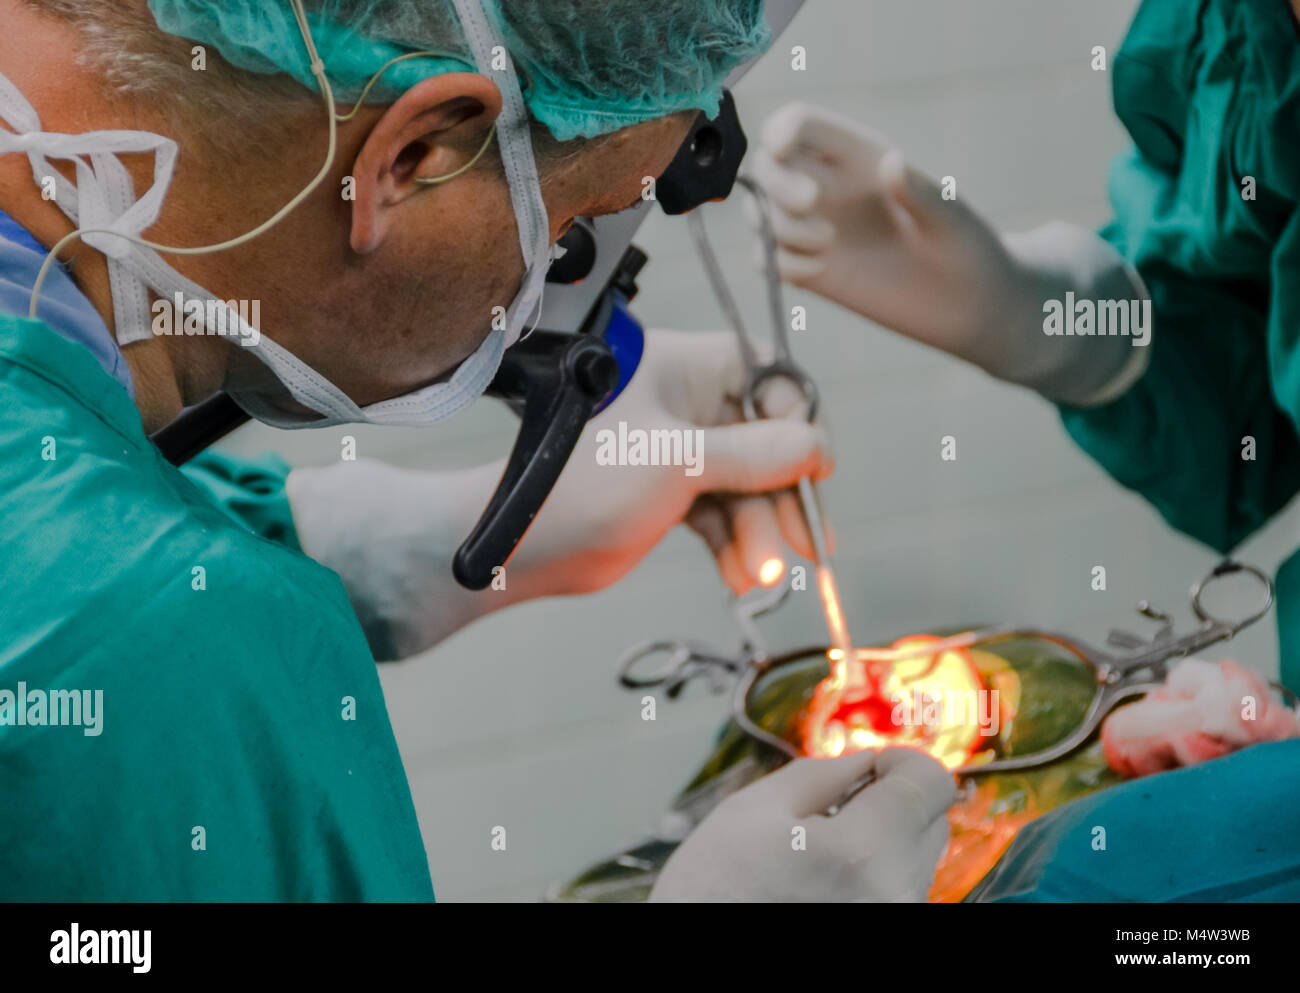 Surgeon implanting a hearing device; focus on doctor while open ear left slightly blurred and out of focus range. Stock Photo